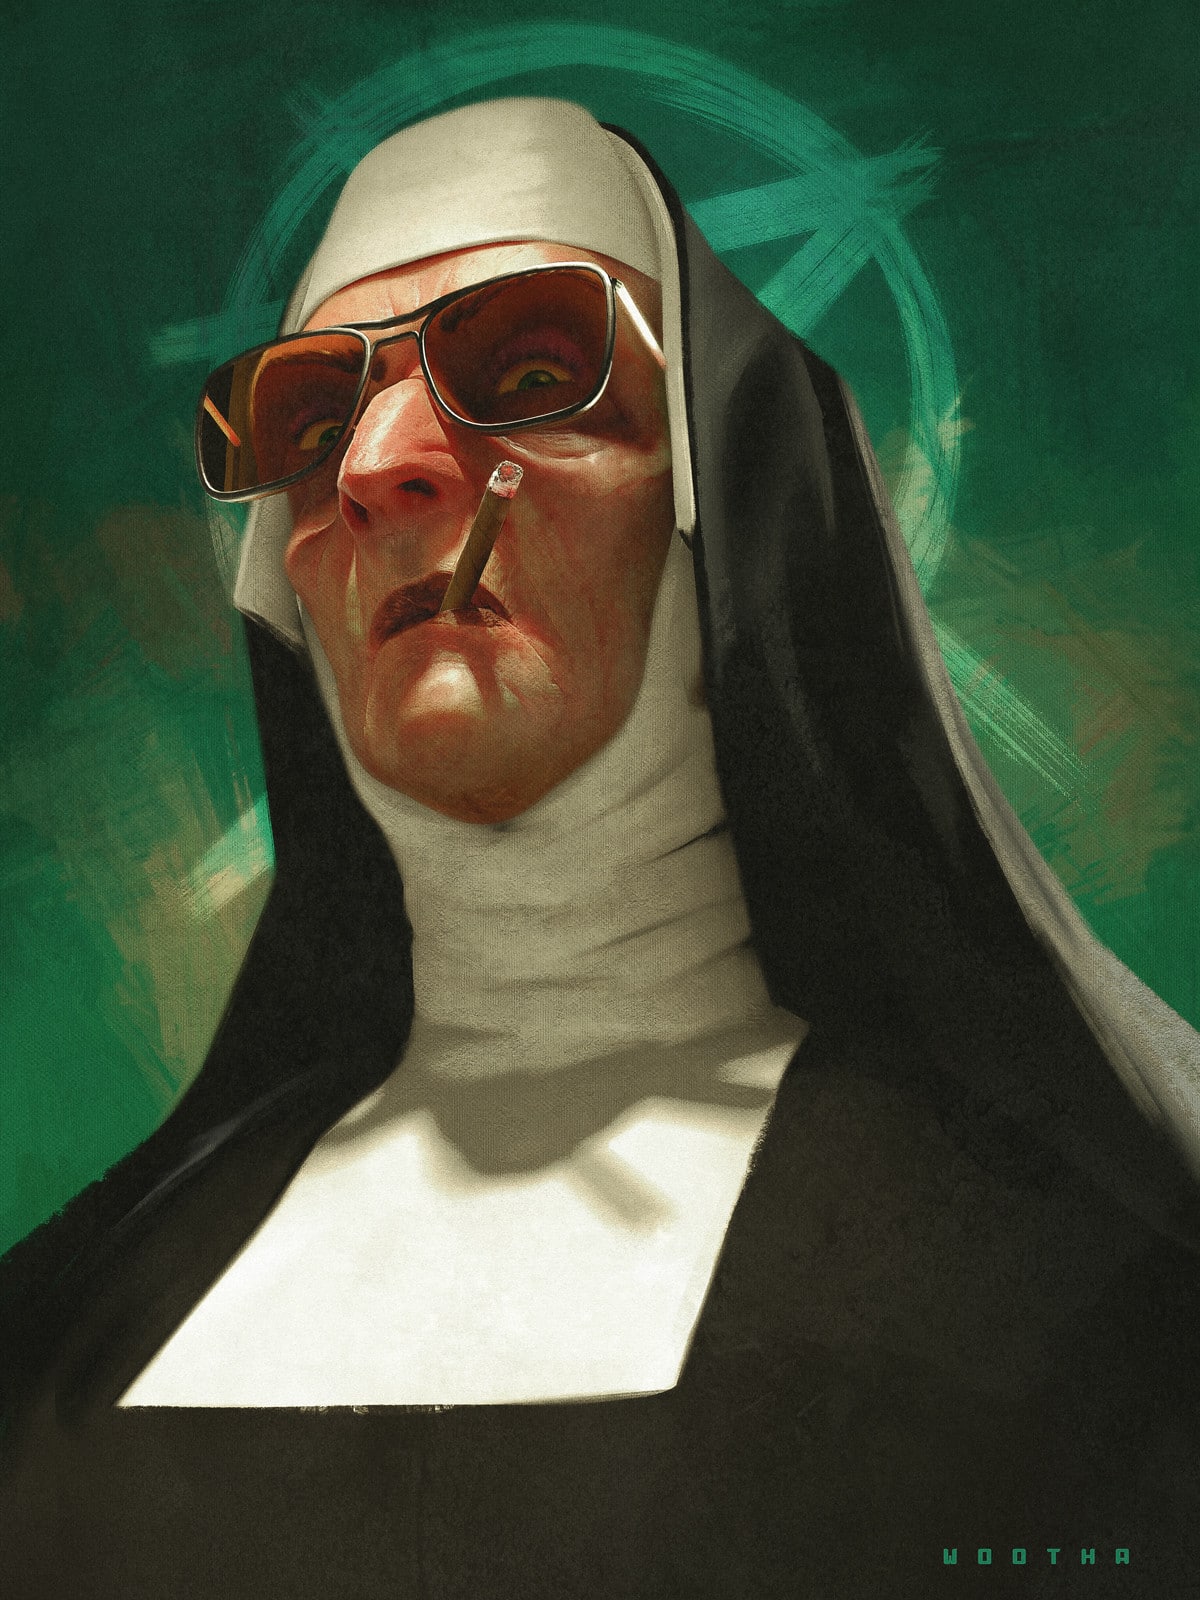 Artwork by Stéphane Wootha Richard. A nun with a cigarette and a pentagram.